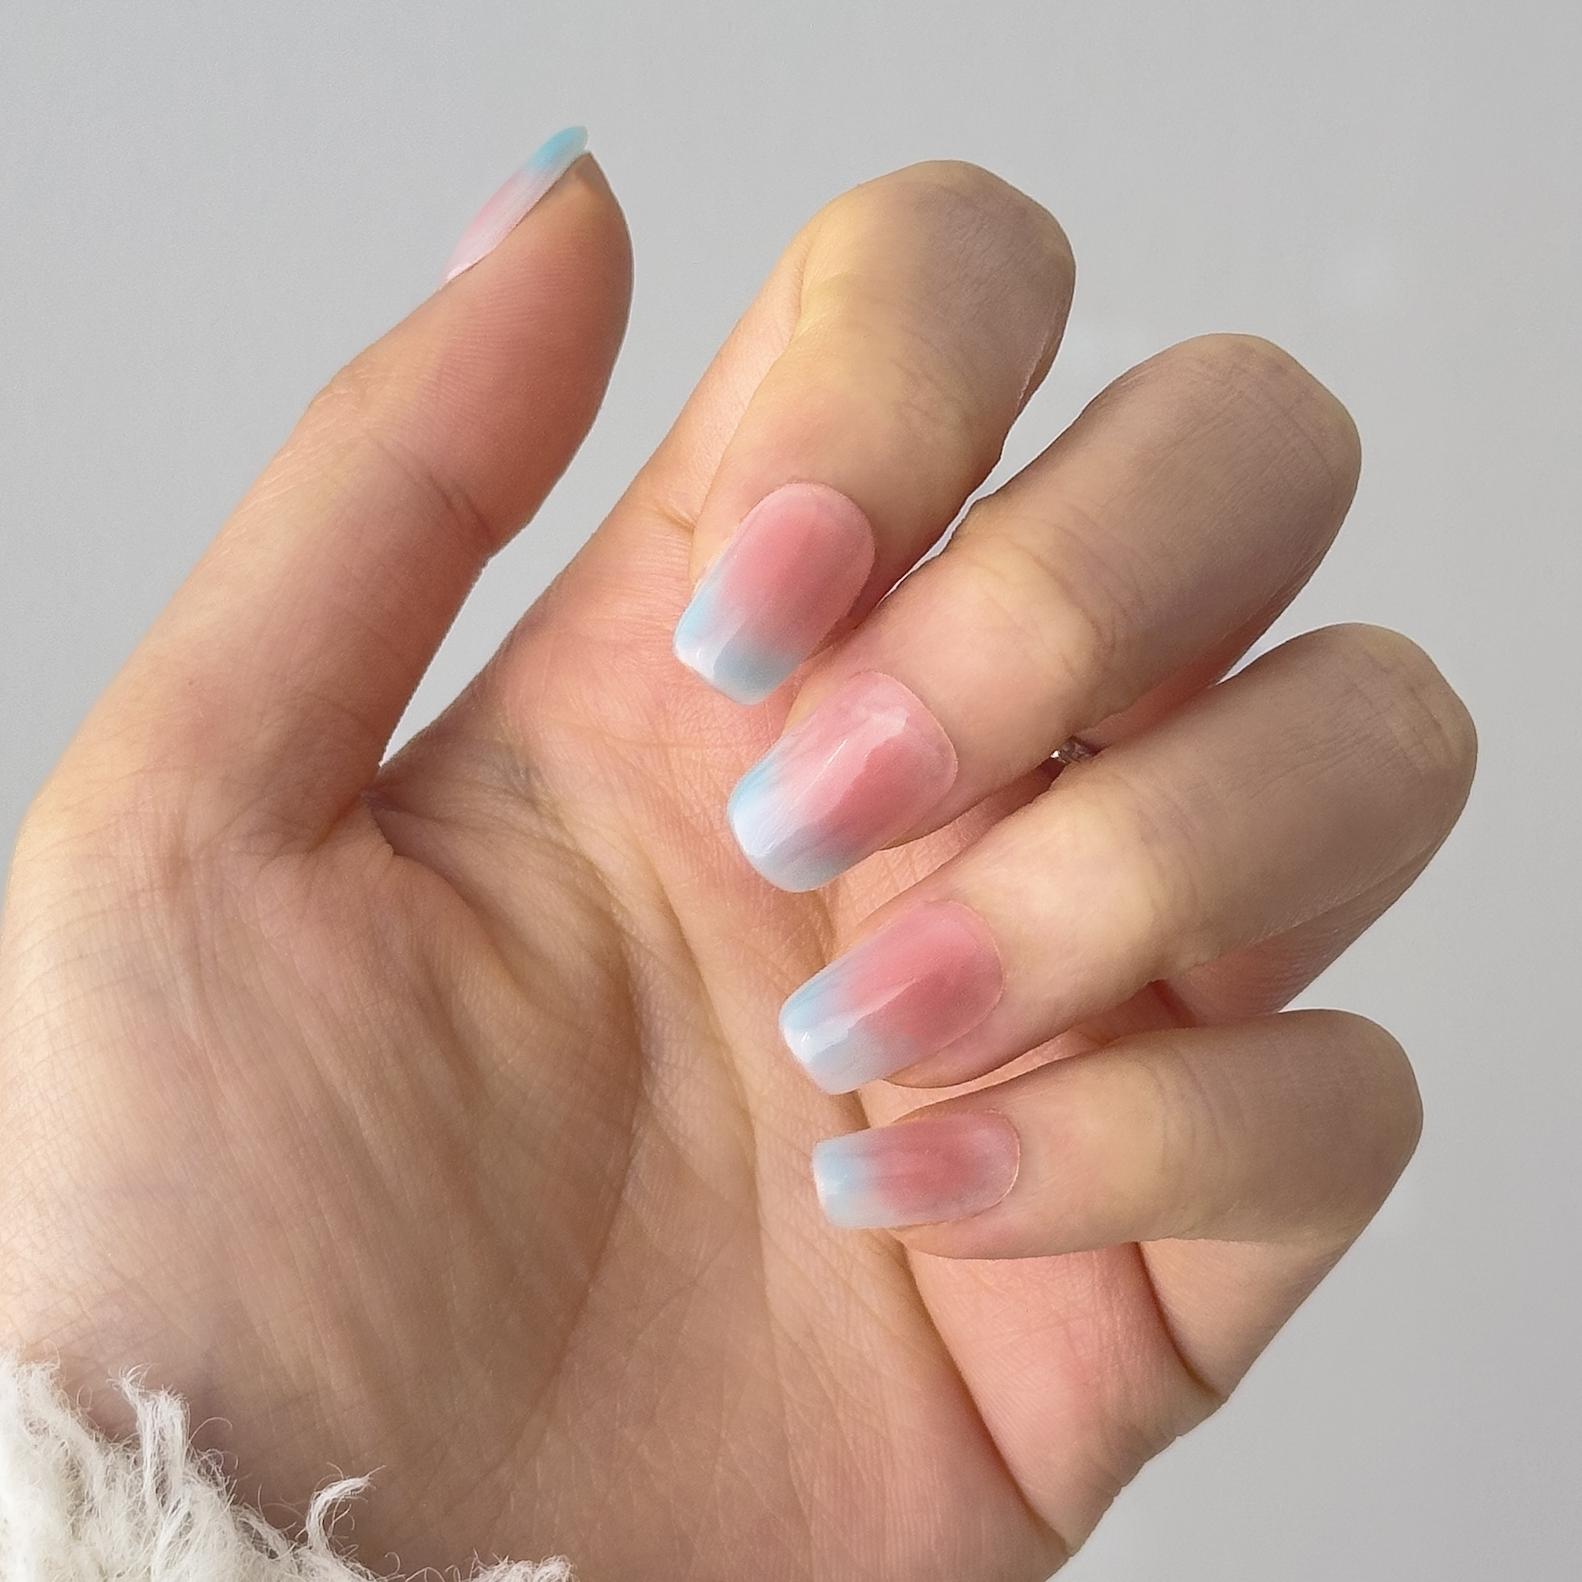 Close-up of a hand wearing MyLilith's press-on nails with a pastel ombre design, transitioning from pink at the base to blue at the tips, in a medium, coffin shape.